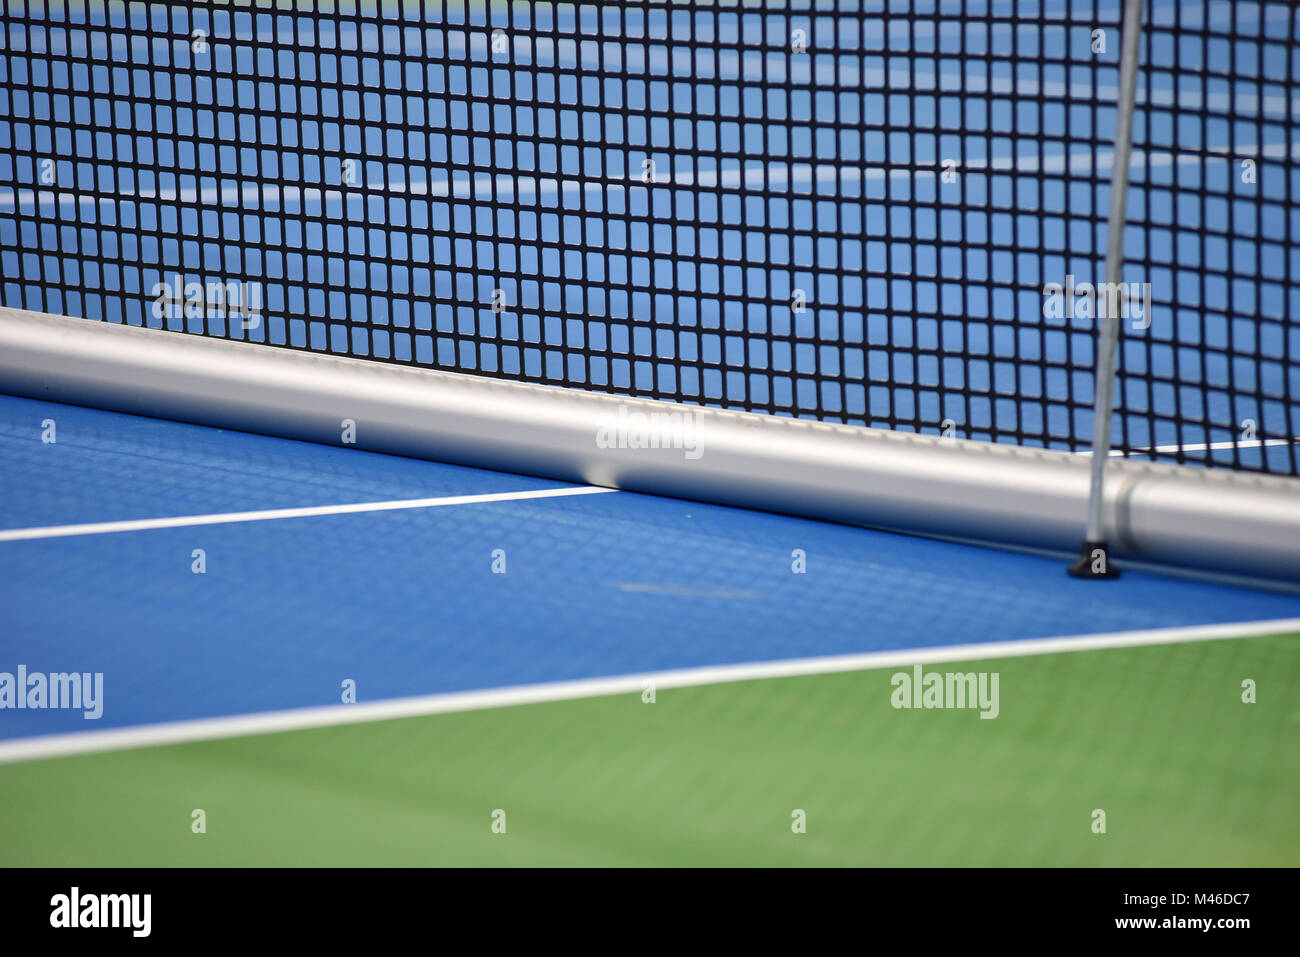 Tennis blue hard court with net before competition Stock Photo